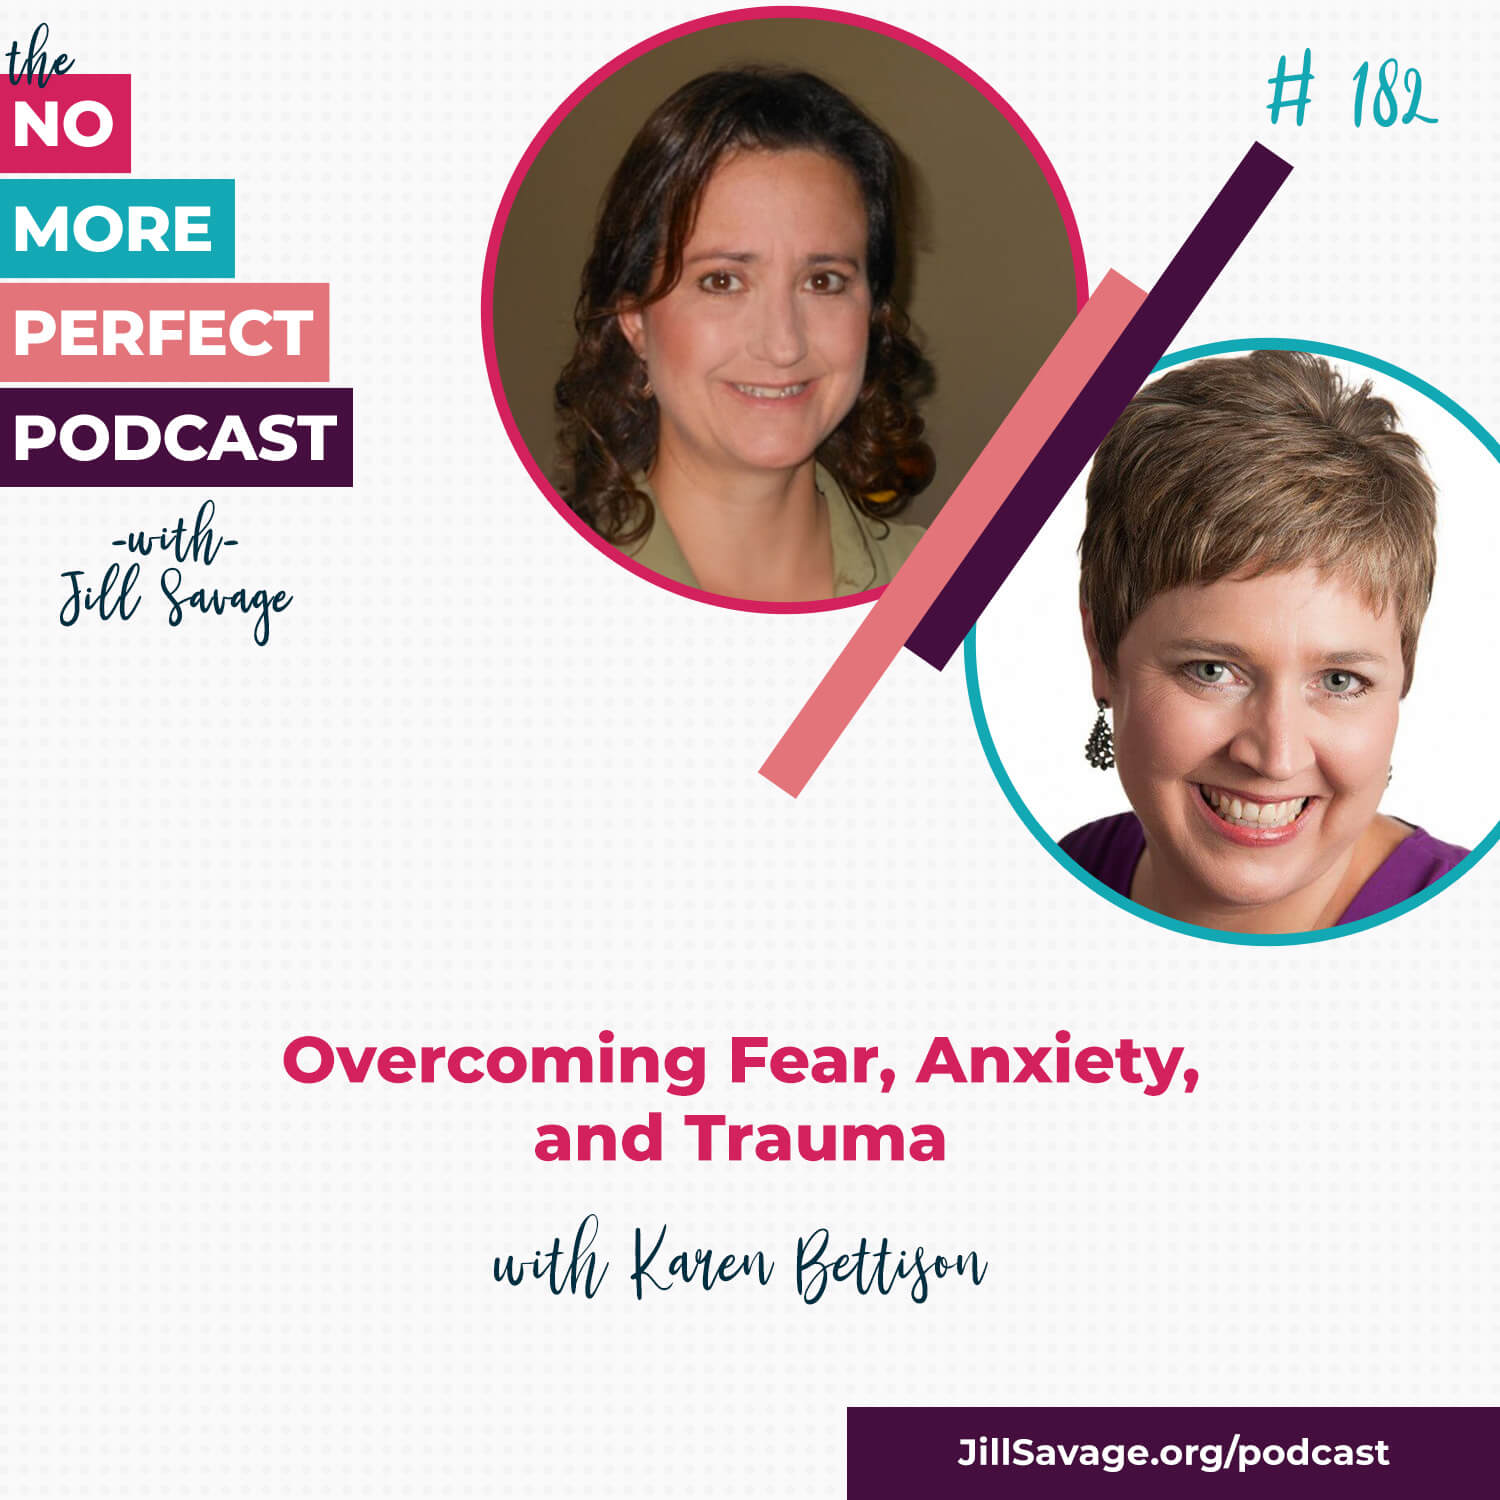 Overcoming Fear, Anxiety, and Trauma with Karen Bettison | Episode 182